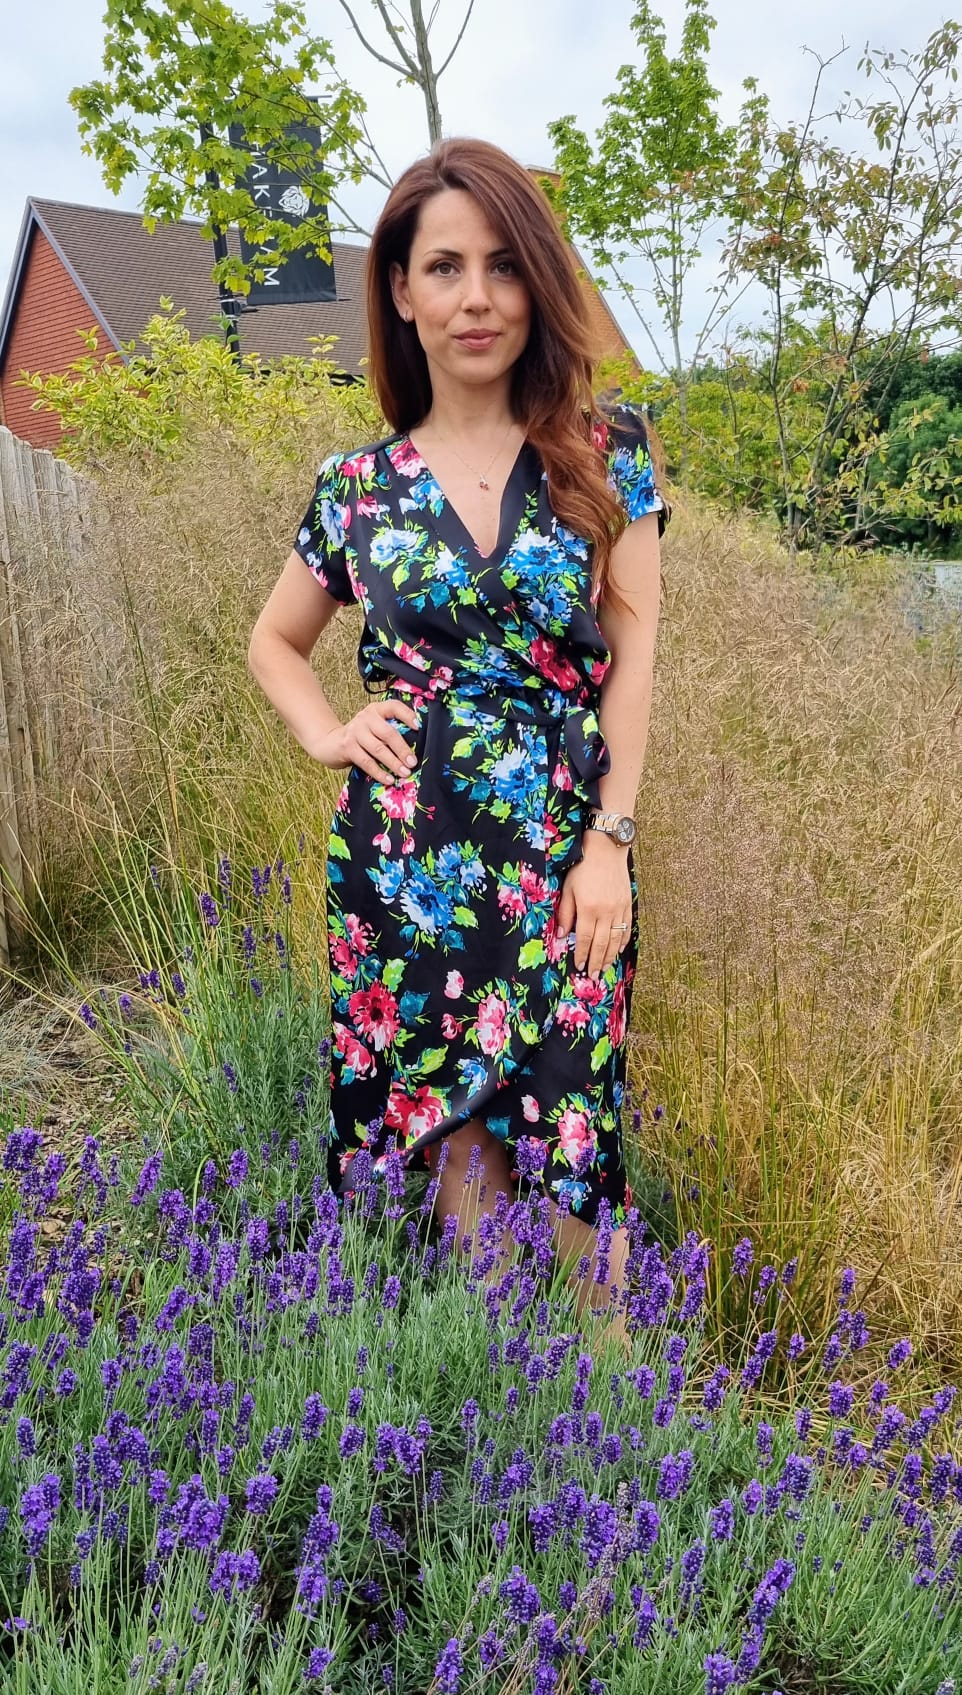 Summer Midi Wrap Dress In Black With Pink And Blue Floral Print